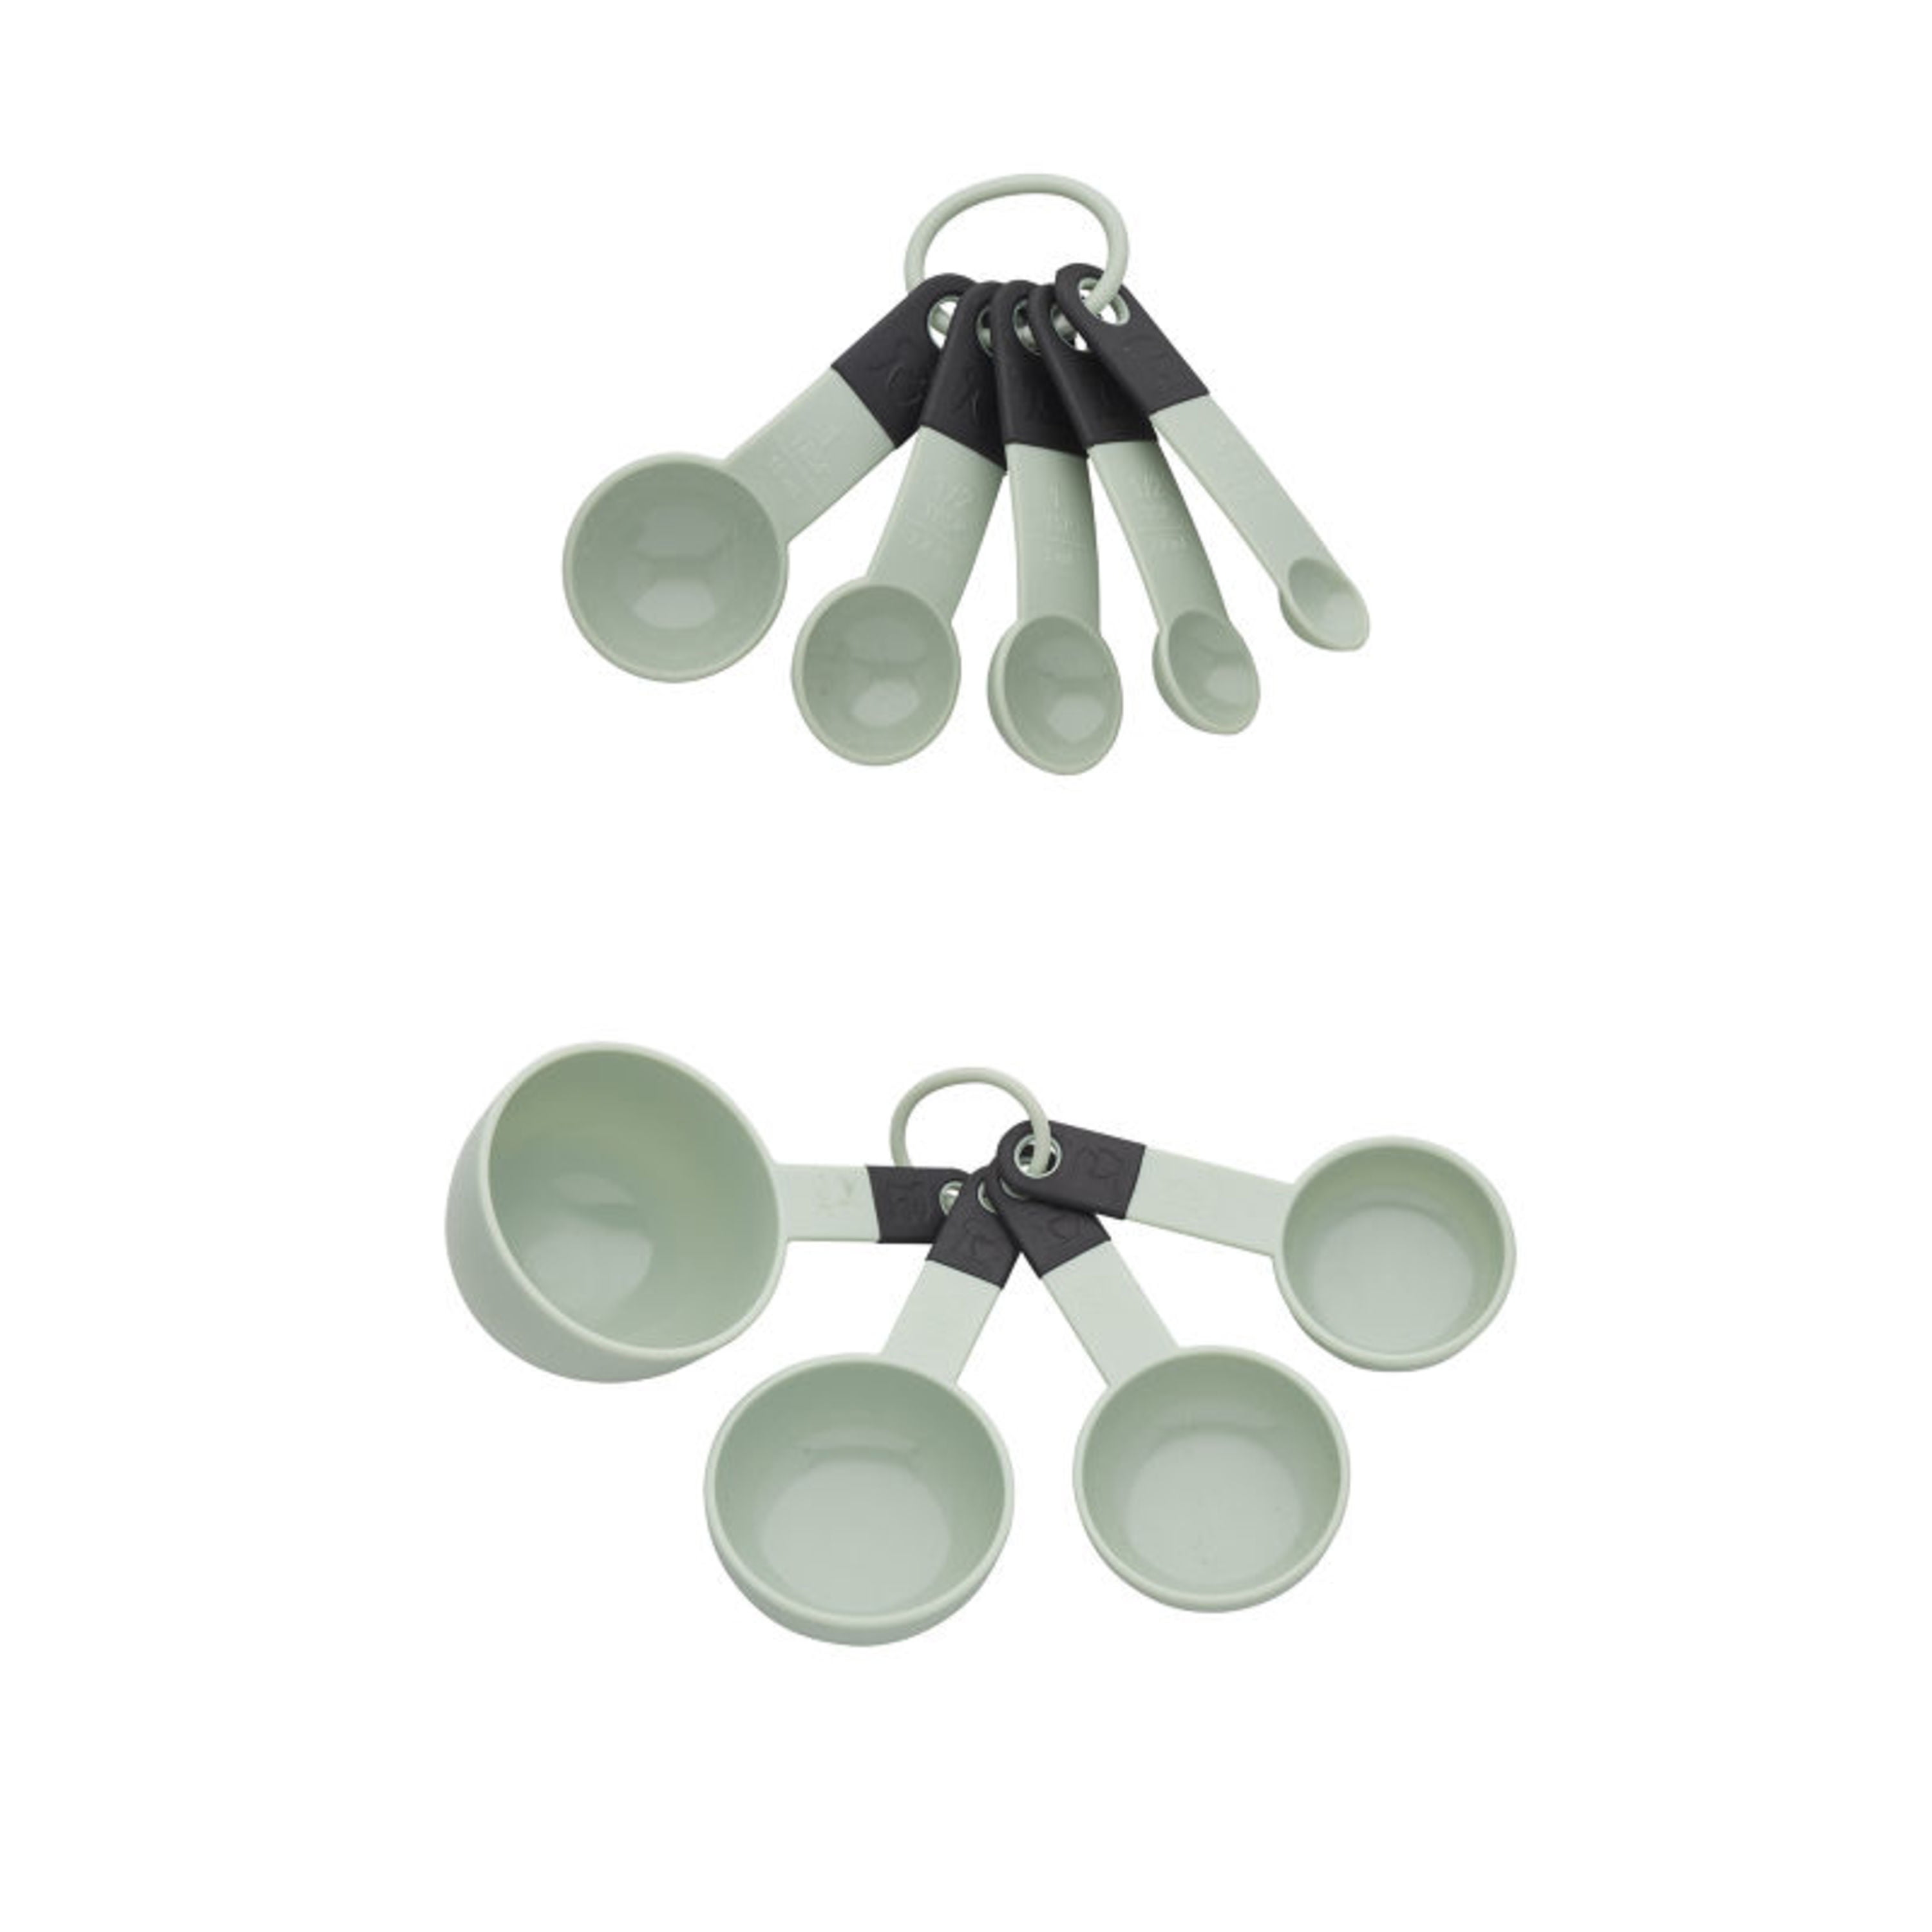 KitchenAid Classic Measuring Cups and Spoons Set 9 pcs